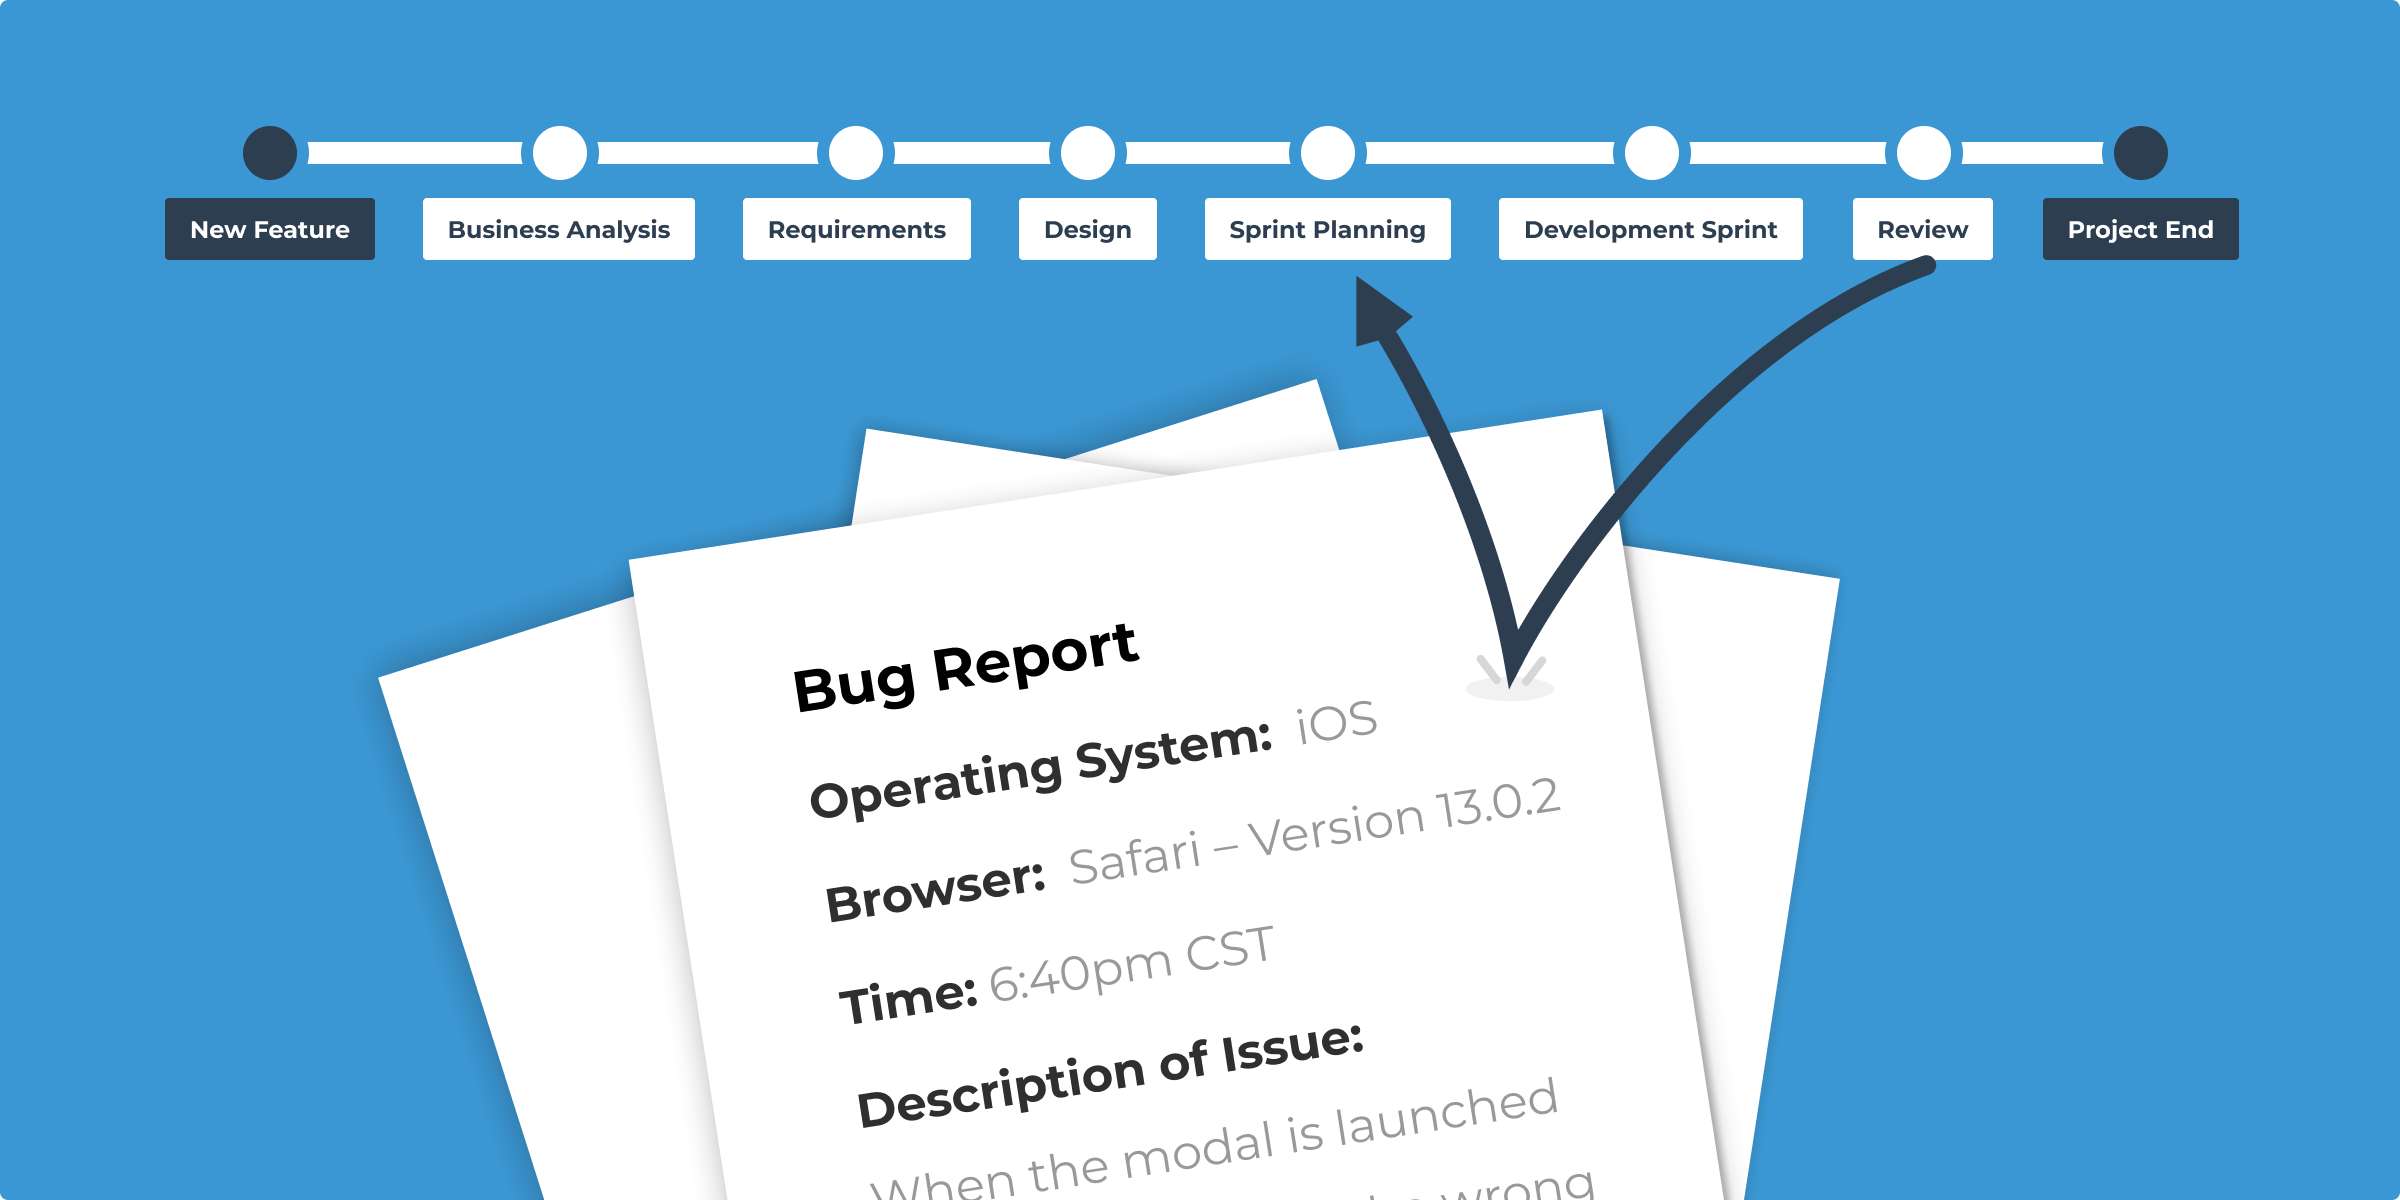 Bugs logged in the "review" process should be intentionally integrated into an upcoming sprint.